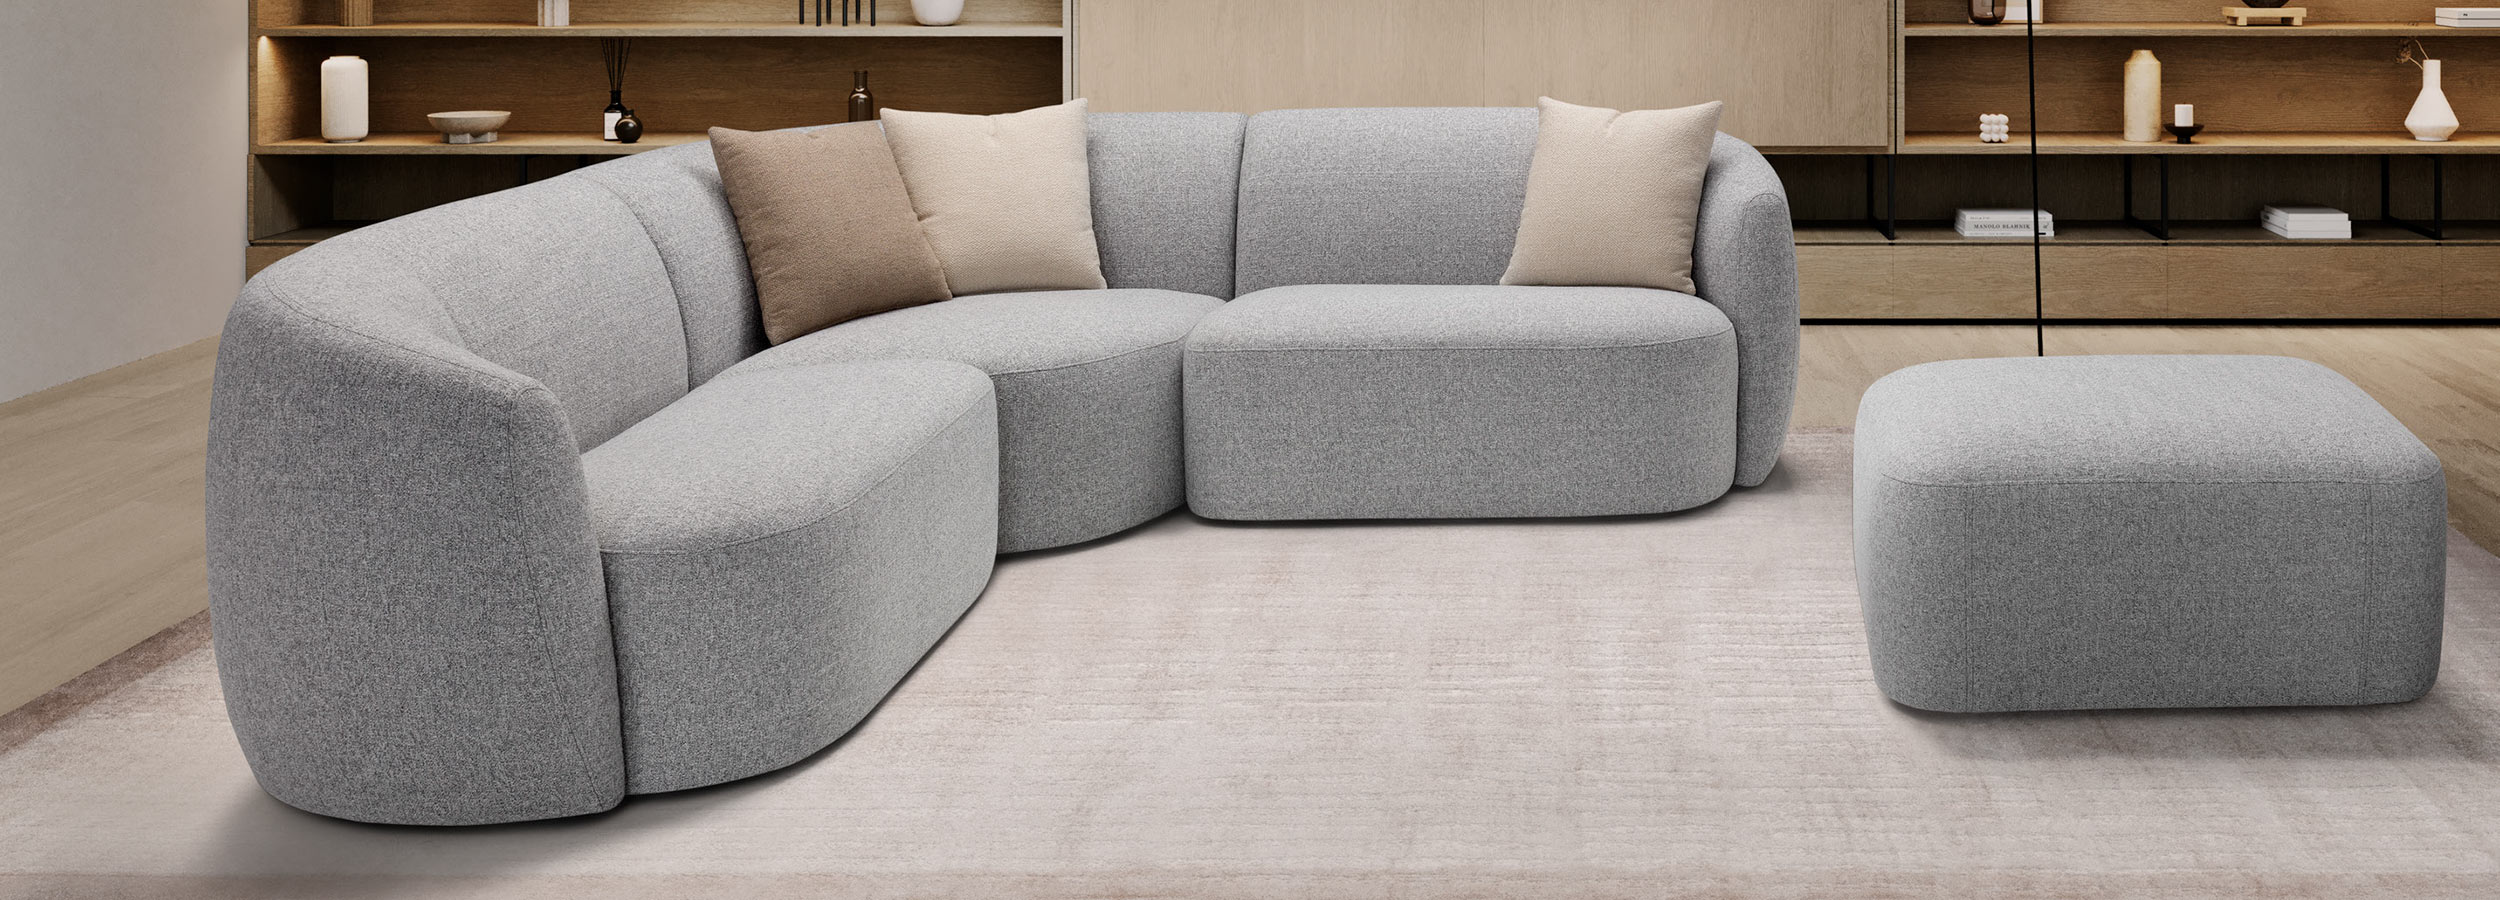 Emotion. A sofa with a strong personality that immediately fills the living area with its rounded, full, hefty yet light lines, like a cloud. A modular solution with soft and deep seats. Comfort at first sight.